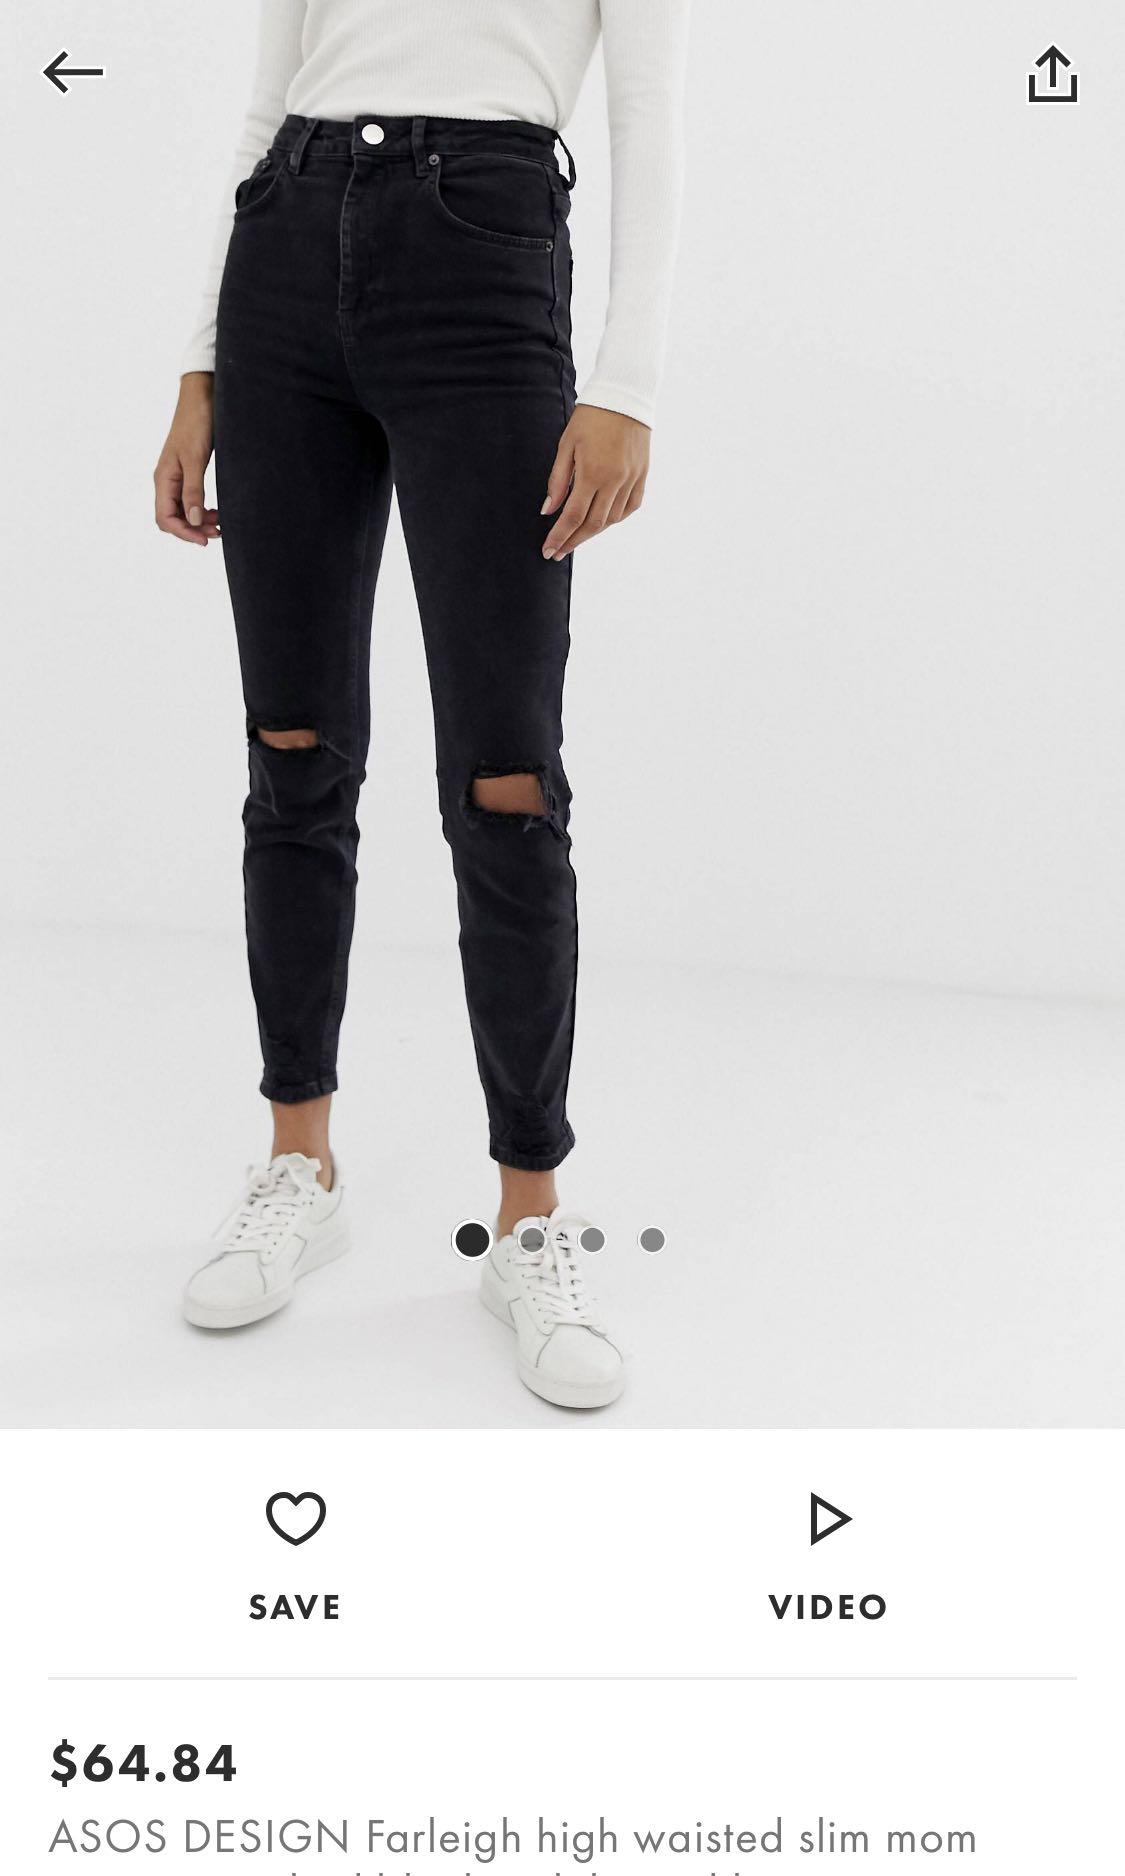 black high waisted ripped mom jeans